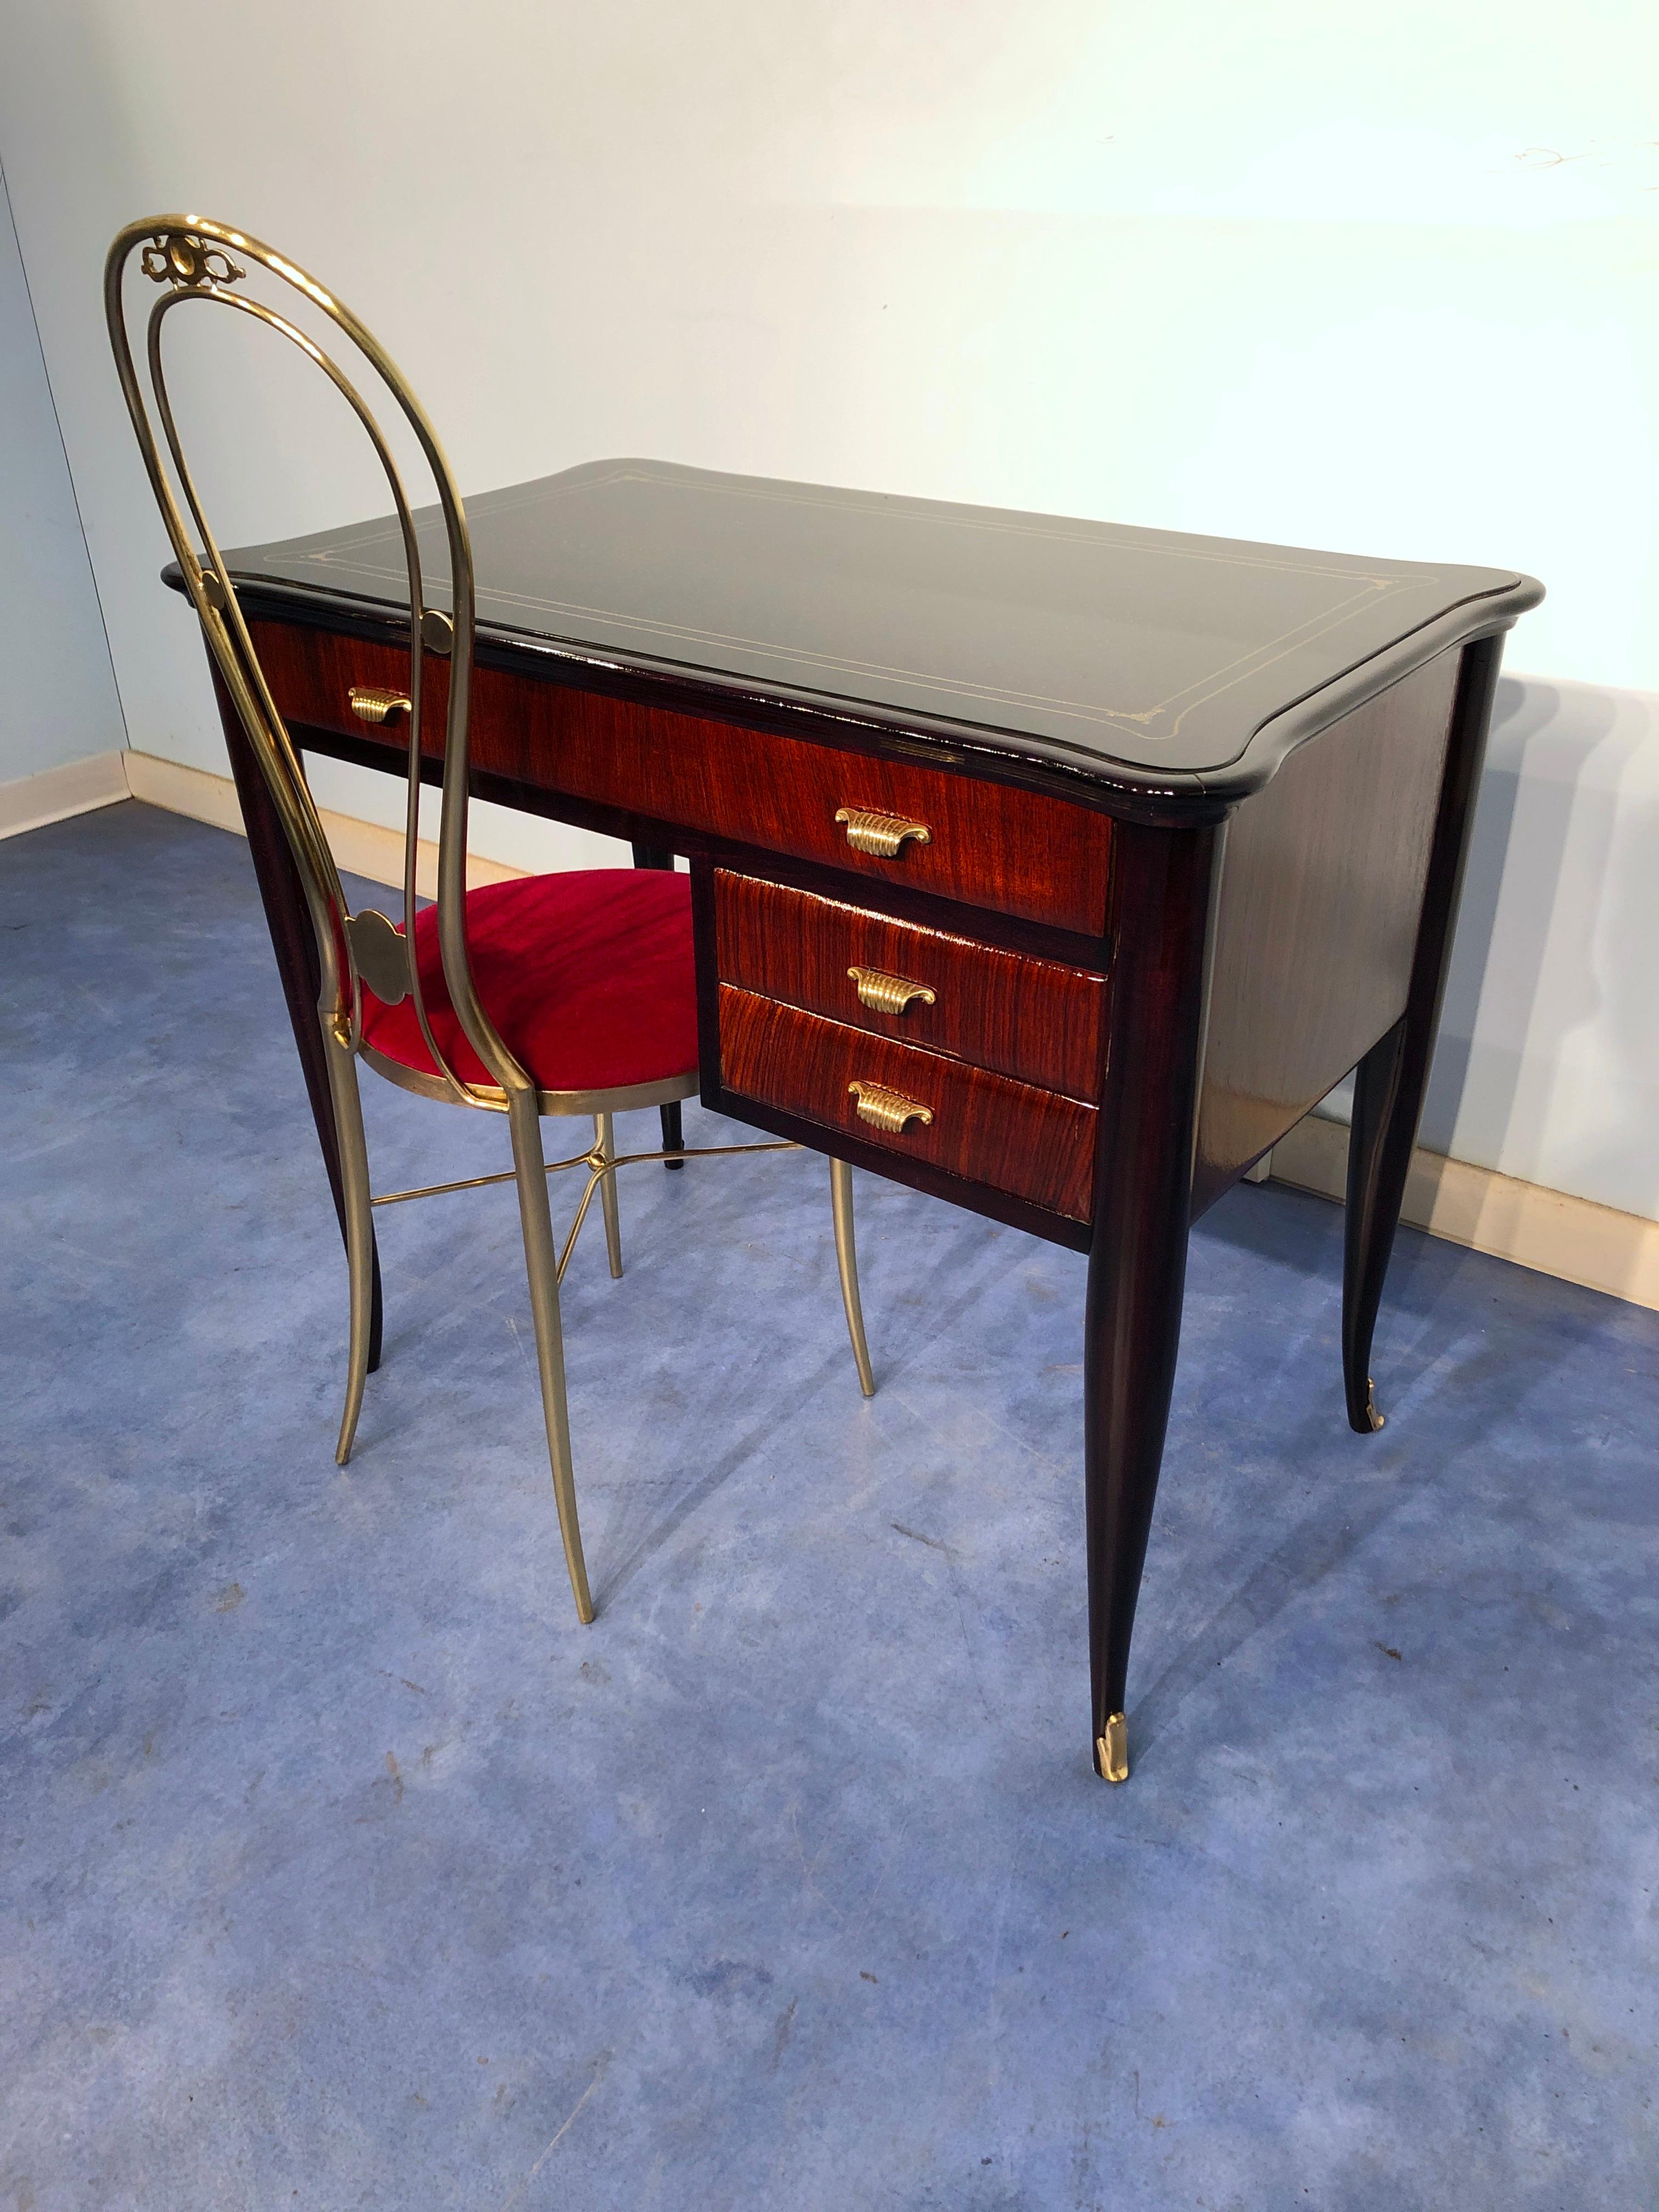 Cute and stylish Italian midcentury modern desk, with a graceful chair, attributed to Paolo Buffa. 
This teakwood desk it is a splendid example of the Italian class design of 1950.
Black glass tabletop with gold decorations, shaped on the sides,